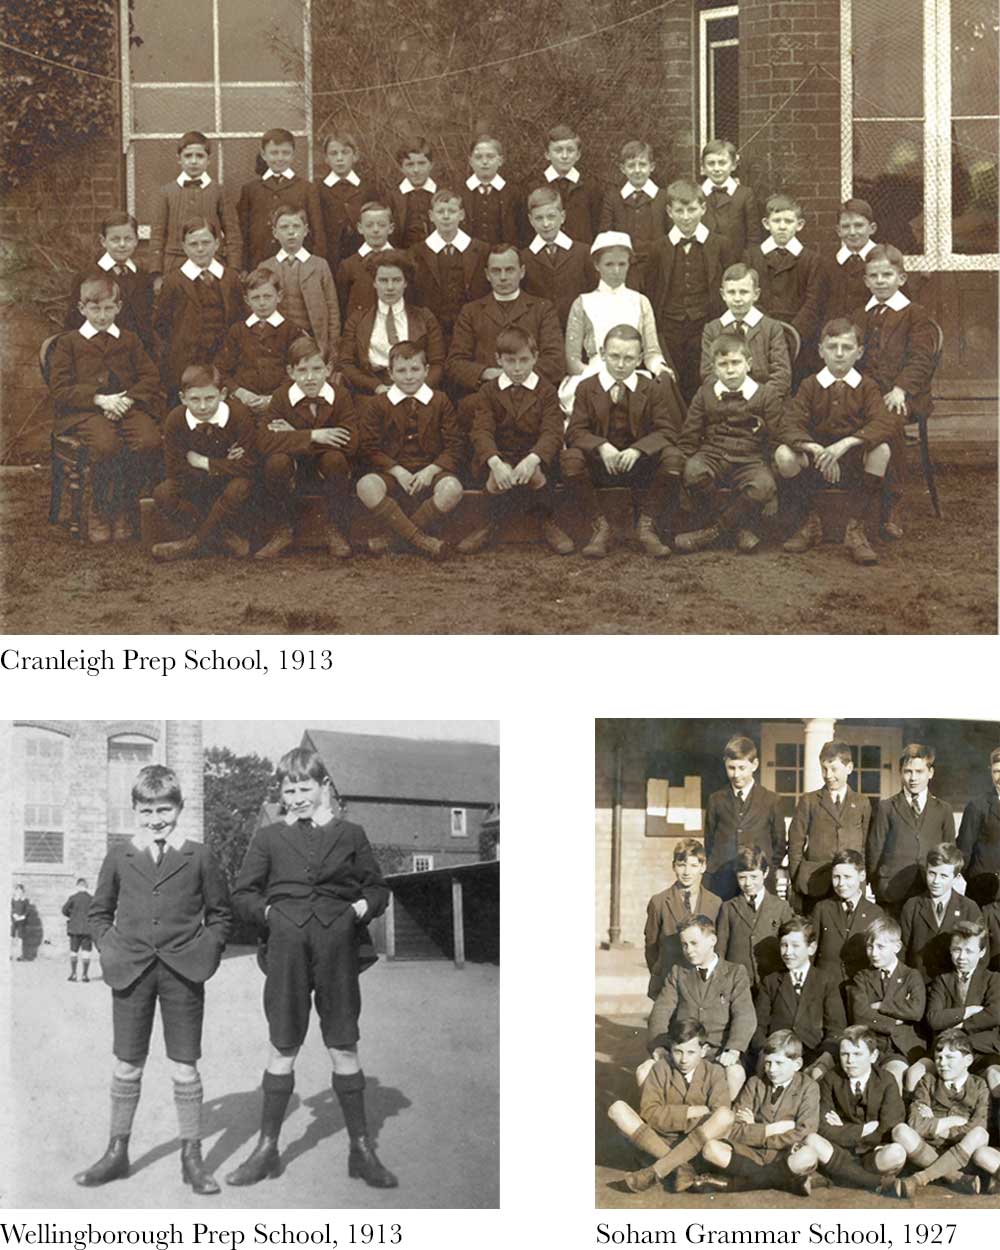 The Origin of Preppy from English Preparatory Schools of early 20th century in 1900s, 1910s, and 1920s